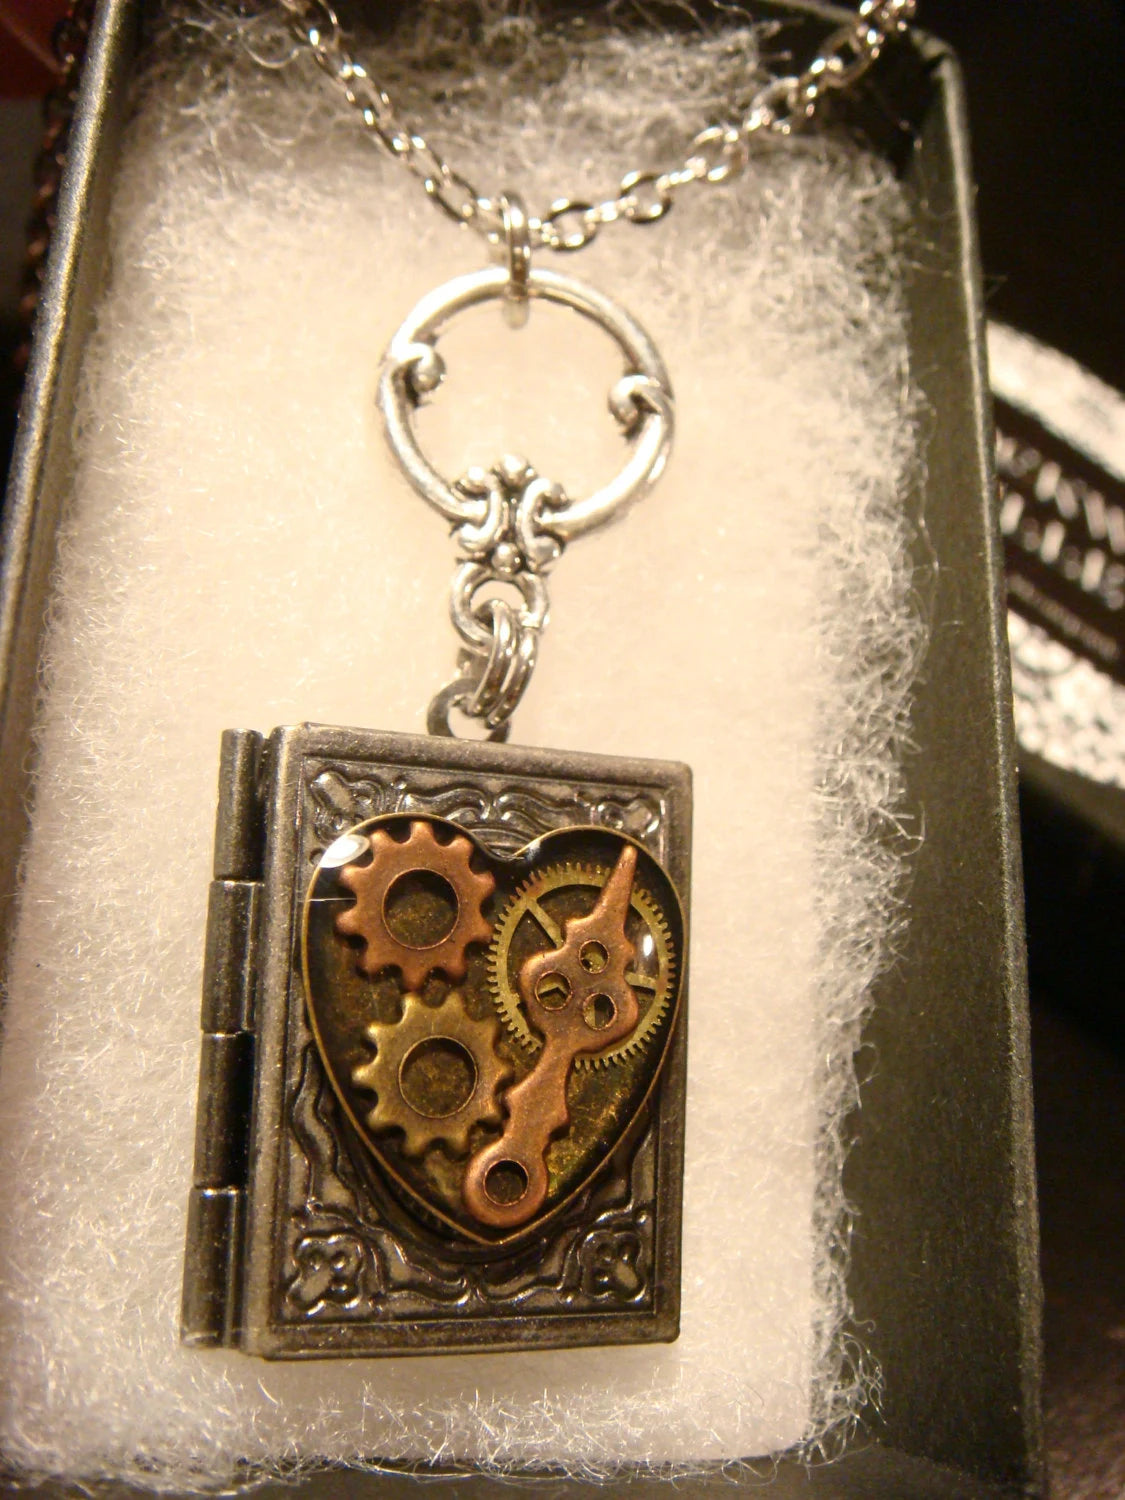 Heart Gears and Watch Parts Book Locket Necklace